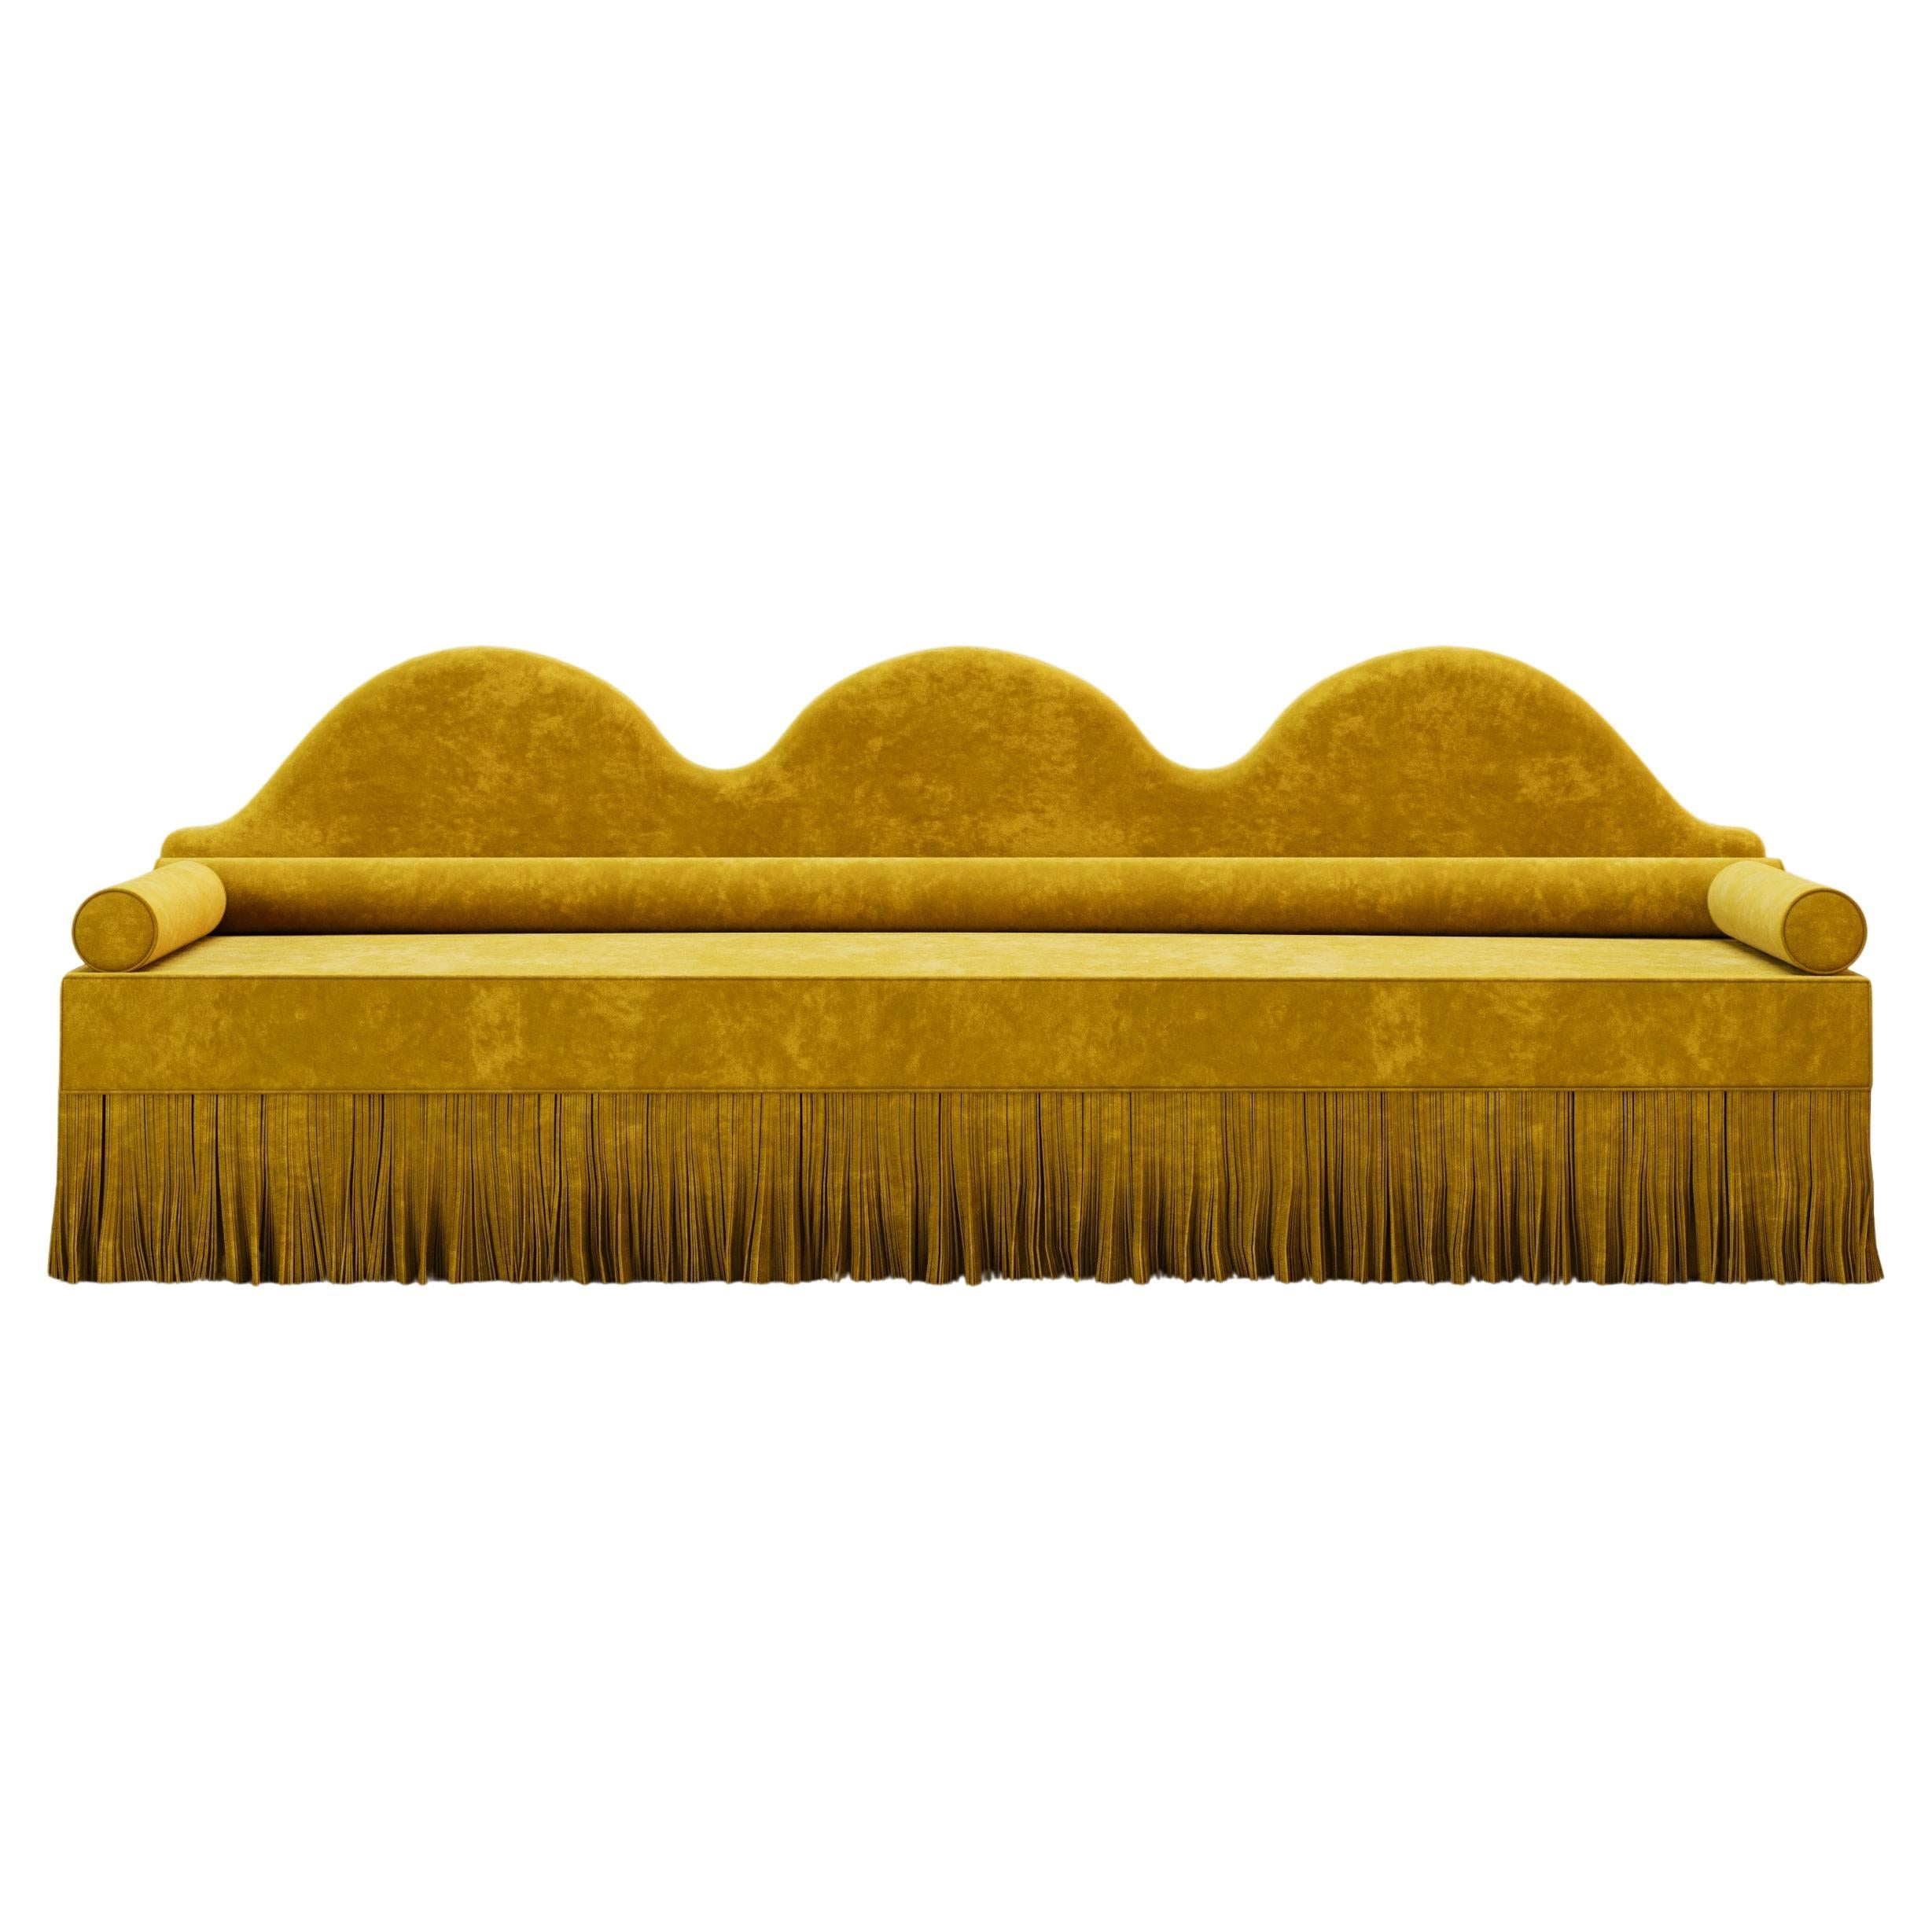 L'INTEMPOREL Sofa in Yellow by Alexandre Ligios, REP by Tuleste Factory